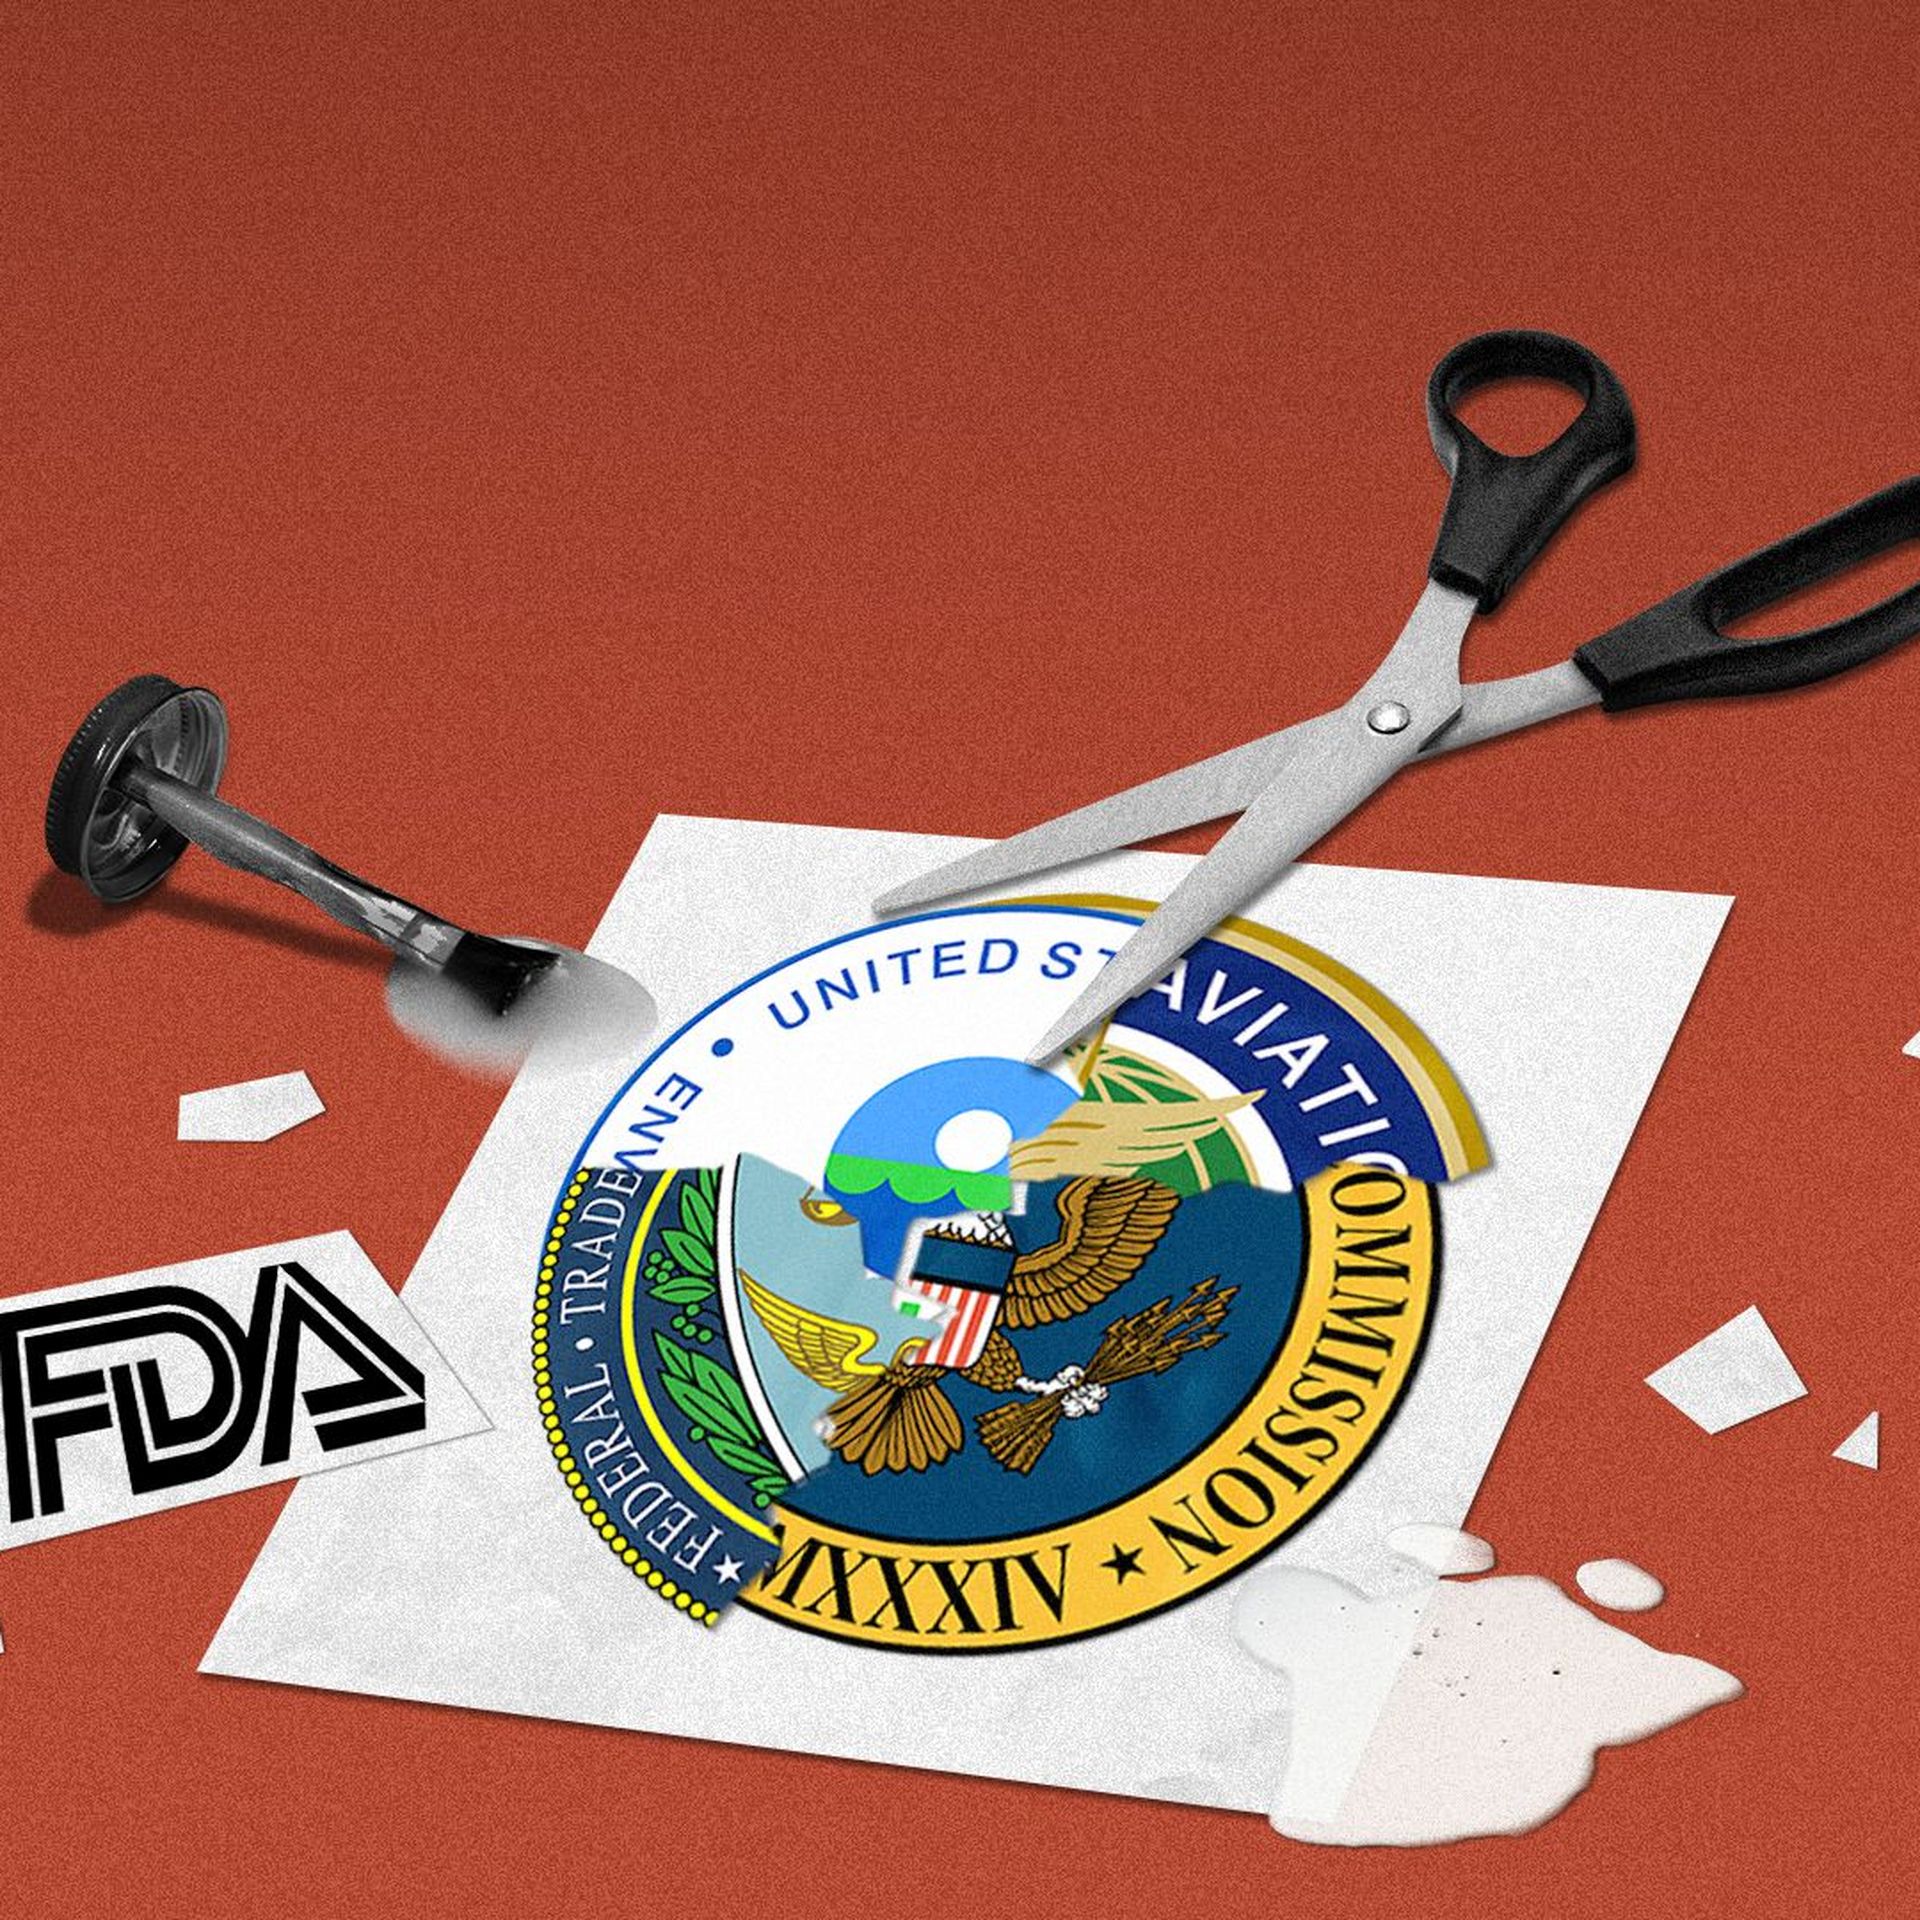 Illustration of U.S. regulatory agency logos cut and pasted together.